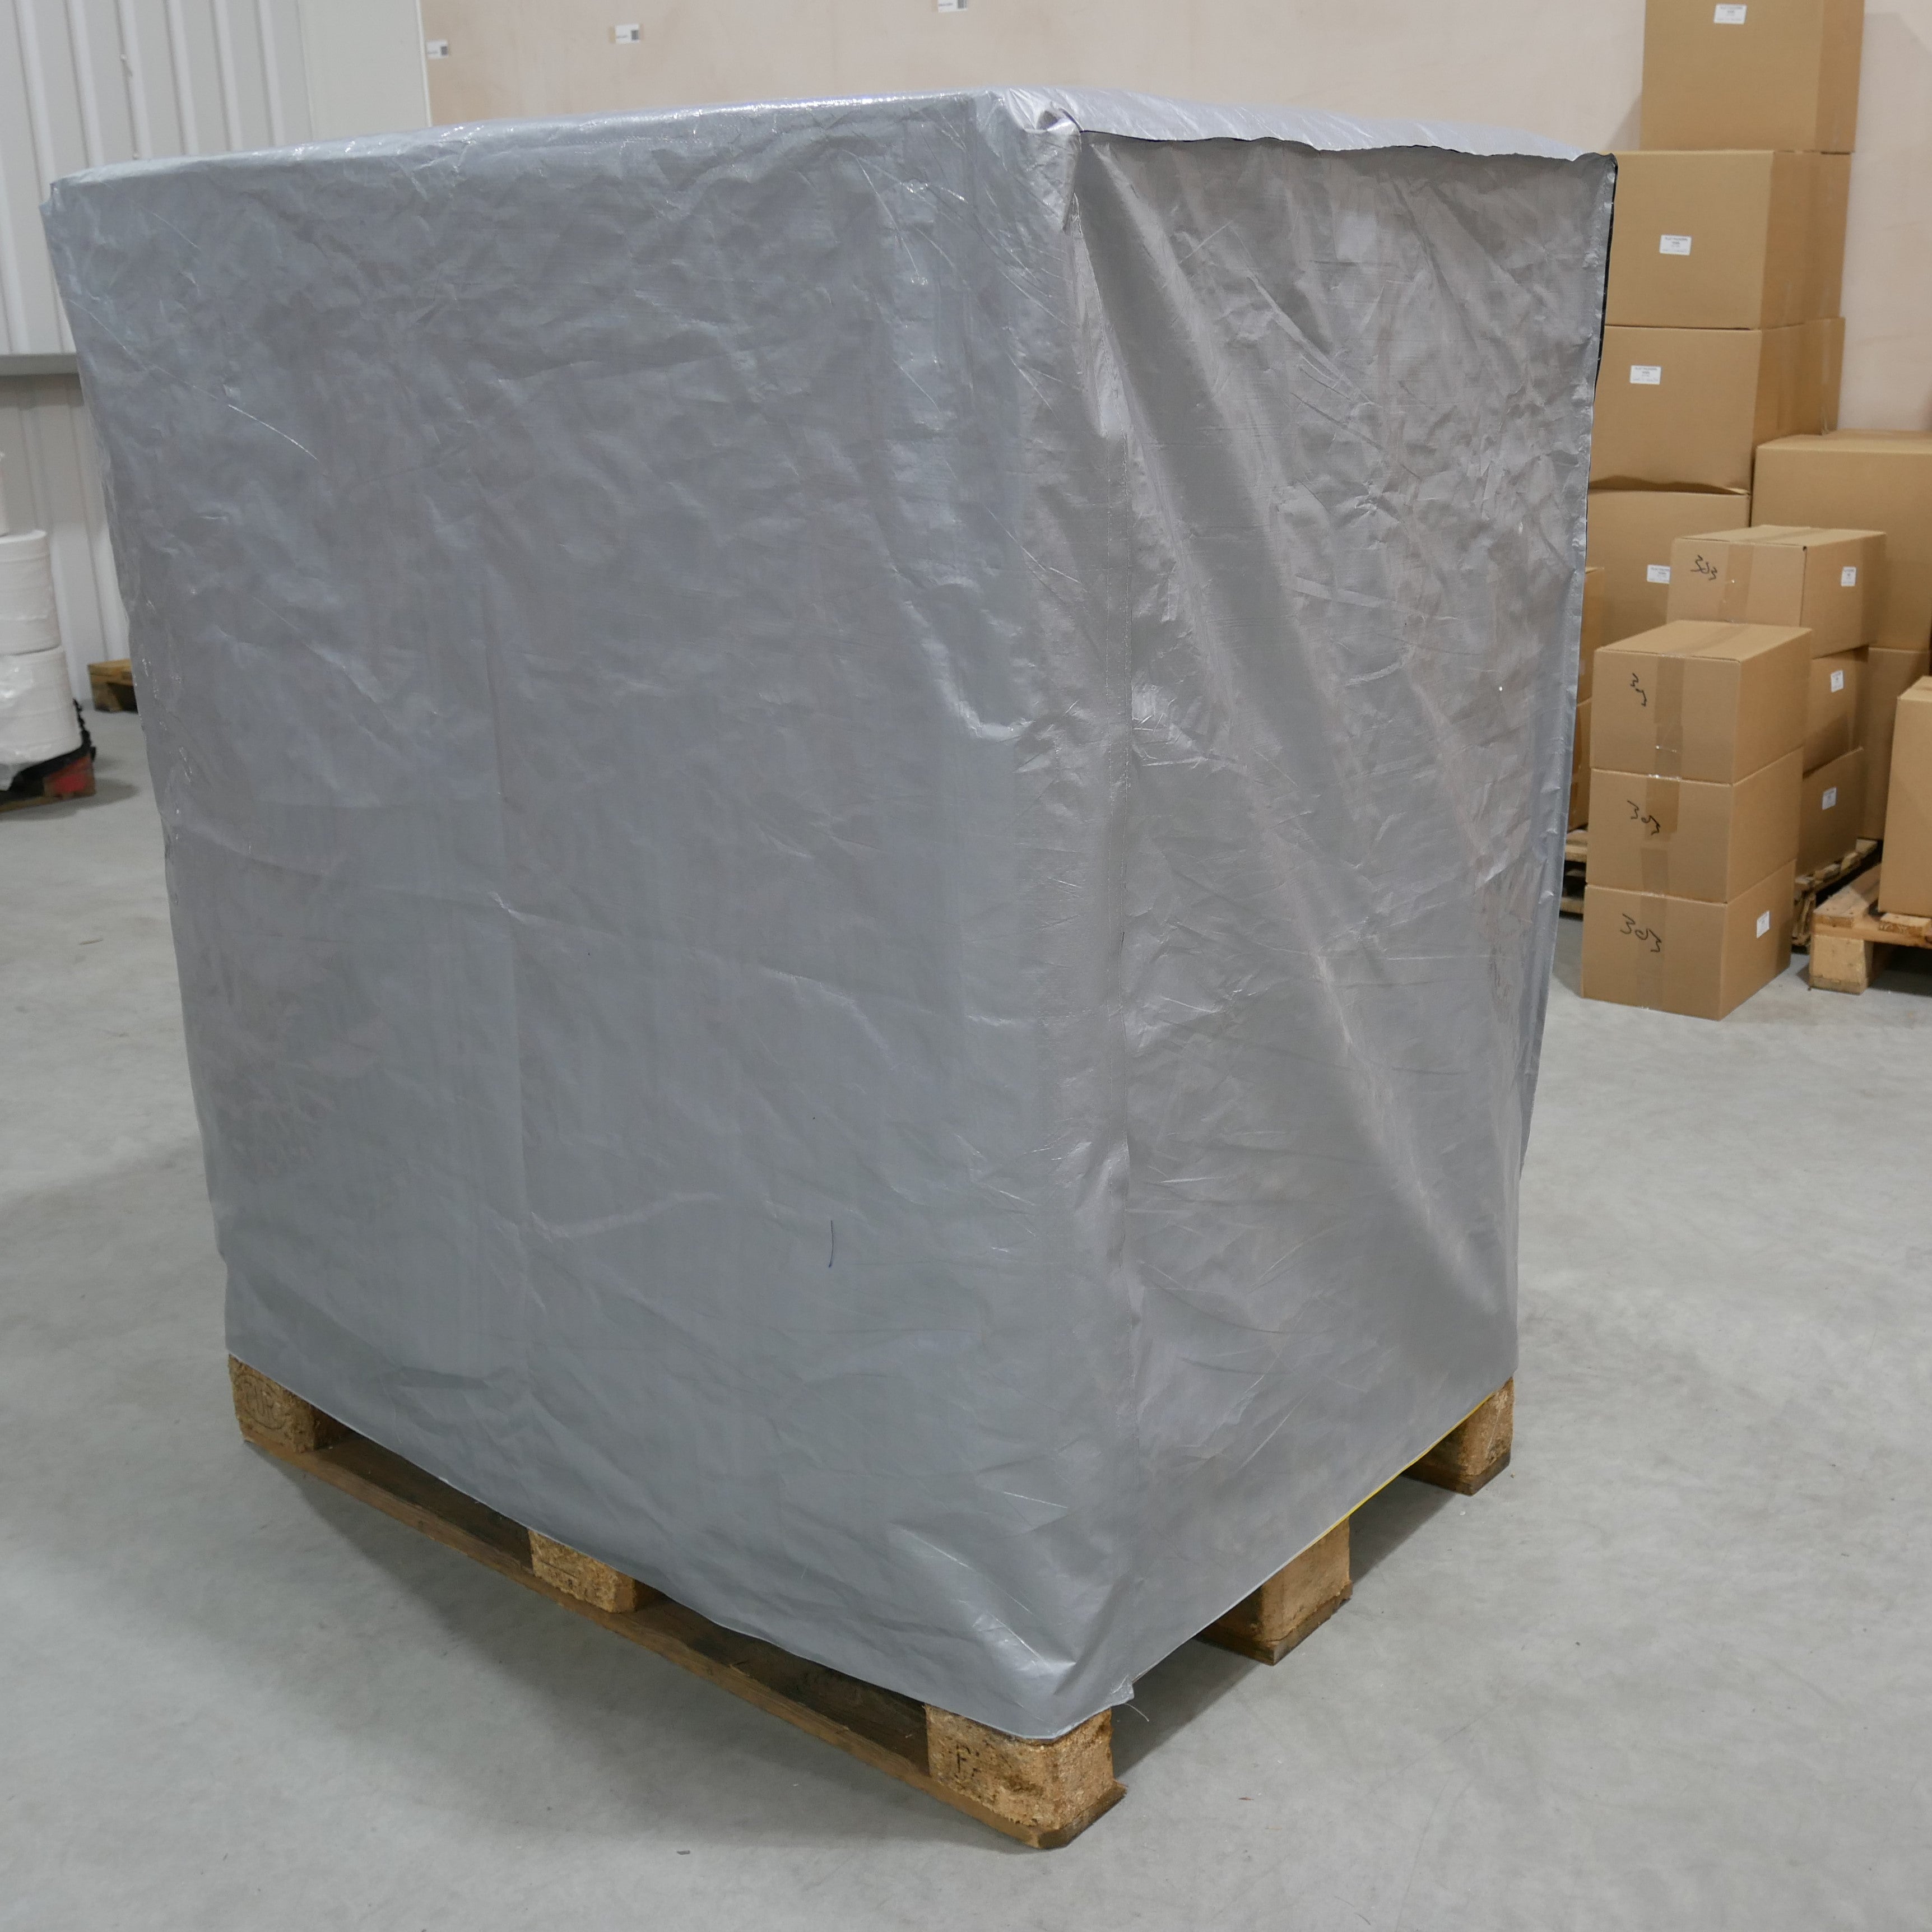 Palband Pallet Covers - Lightweight Polyethylene Material To suit Euro Pallets